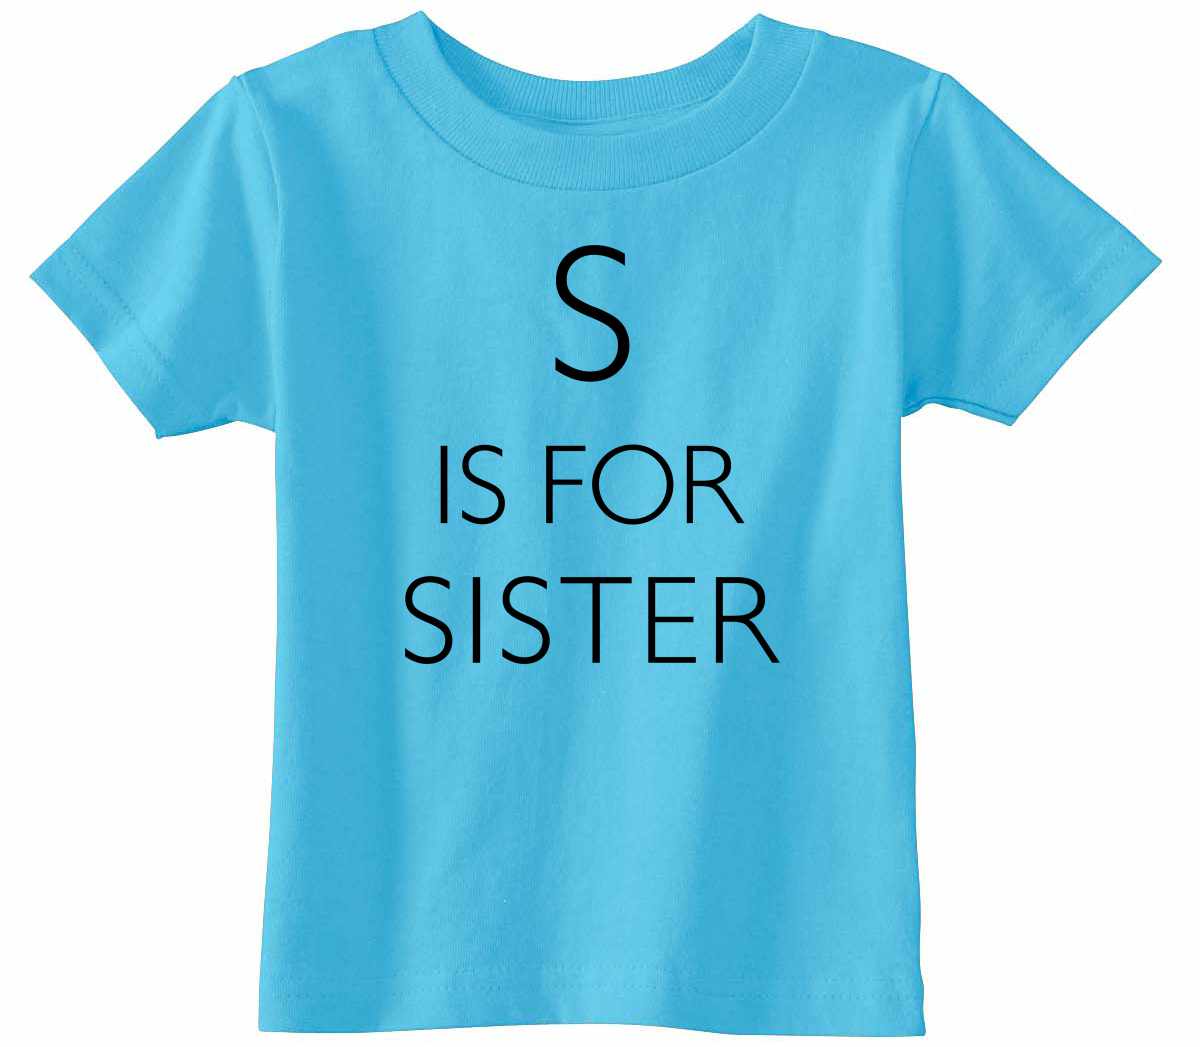 S is for Sister Infant/Toddler 